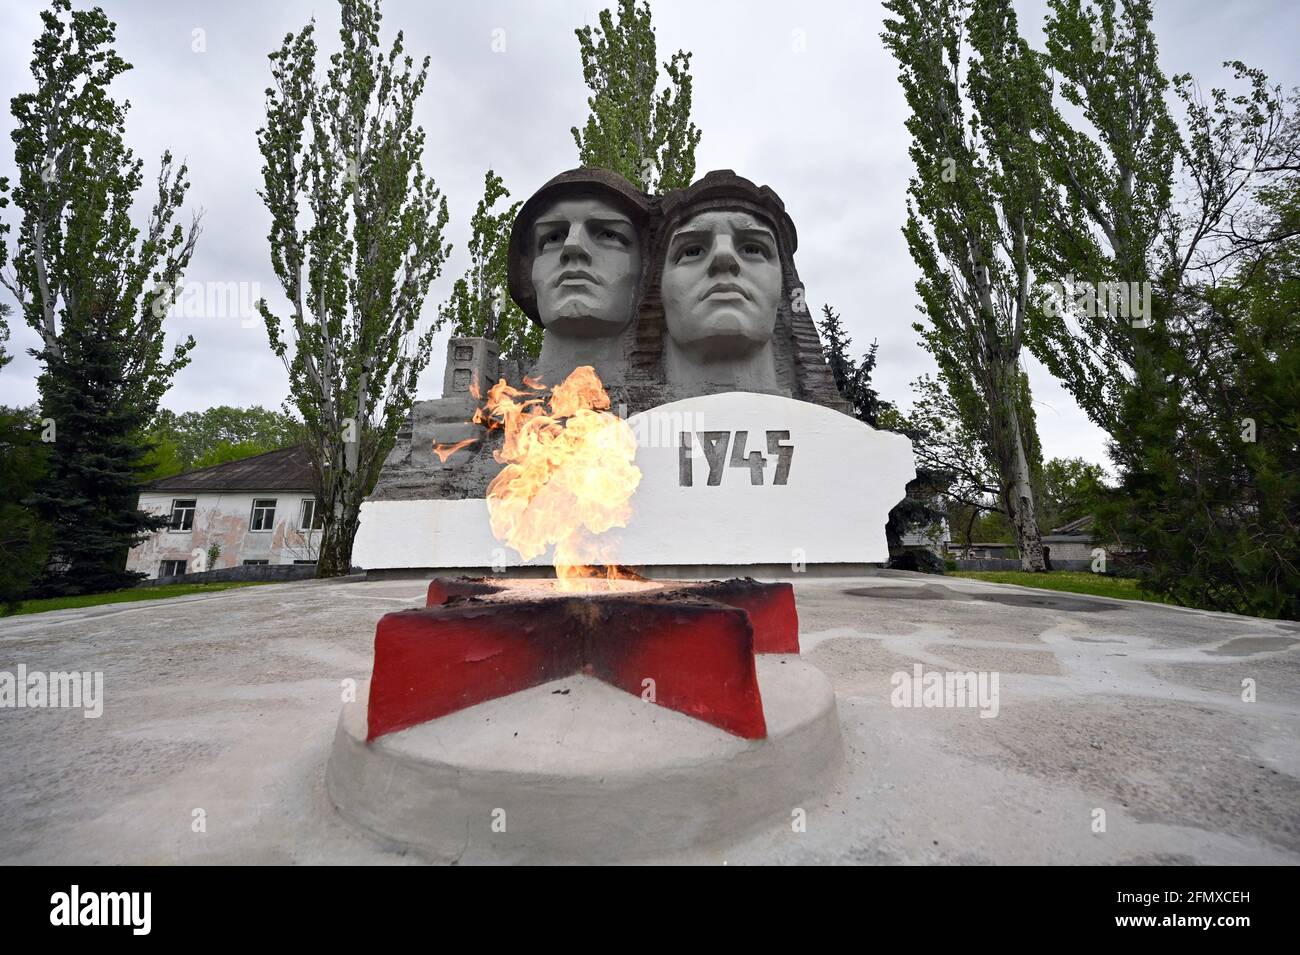 SIEVIERODONETSK, UKRAINE - MAY 9, 2021 - The Eternal Flame is ablaze at the Memorial of Glory mass grave on the Day of Victory over Nazism, Sievierodo Stock Photo